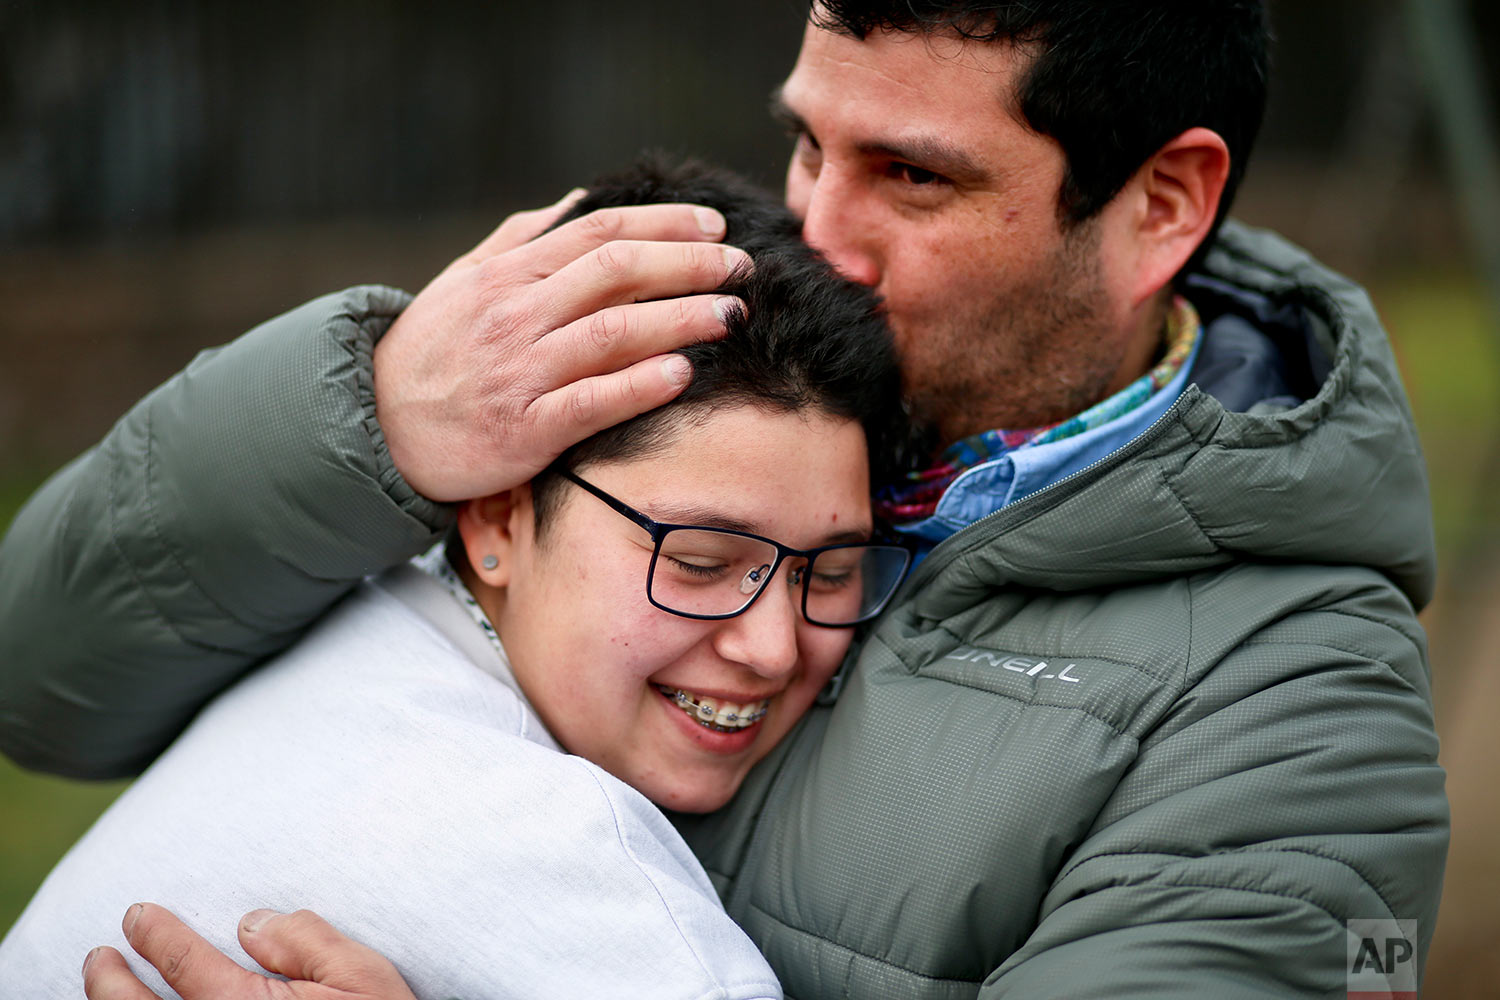  In this Aug. 15, 2017 photo, transgender boy Valentin, 16, is embraced by his father Juan Carlos at a park in Santiago, Chile. Valentin and his father were at the park for a workshop that focused on gender and empowerment. (AP Photo/Esteban Felix) 